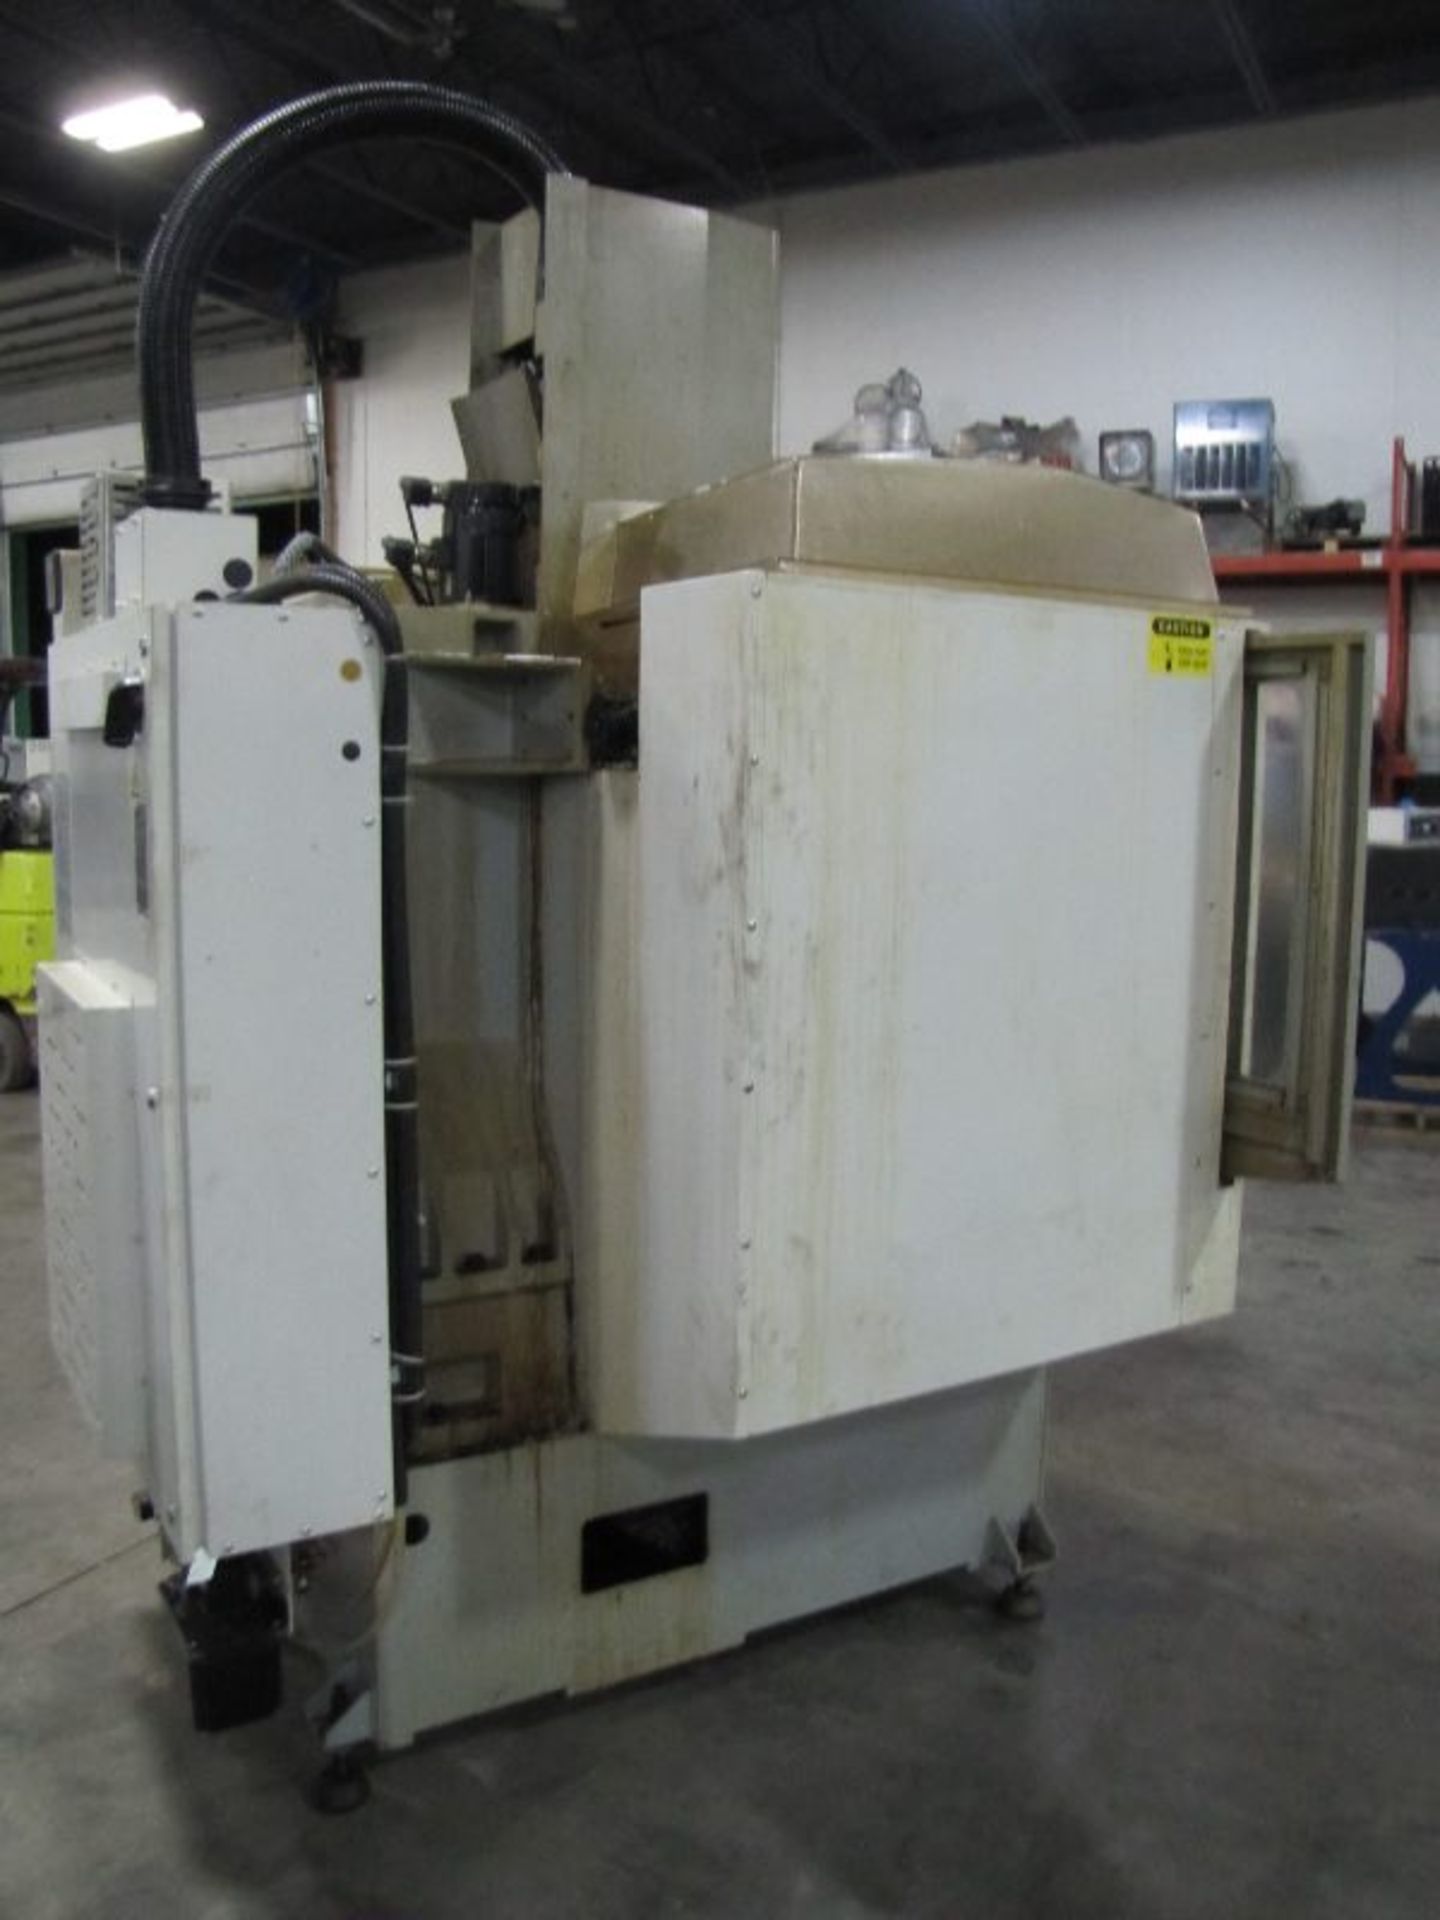 HAAS Super Mini Mill Vertical CNC Mill, S/N: 30363 Mfg. 12/02, HAAS CNC Control, Table Size 12” X - Image 5 of 9